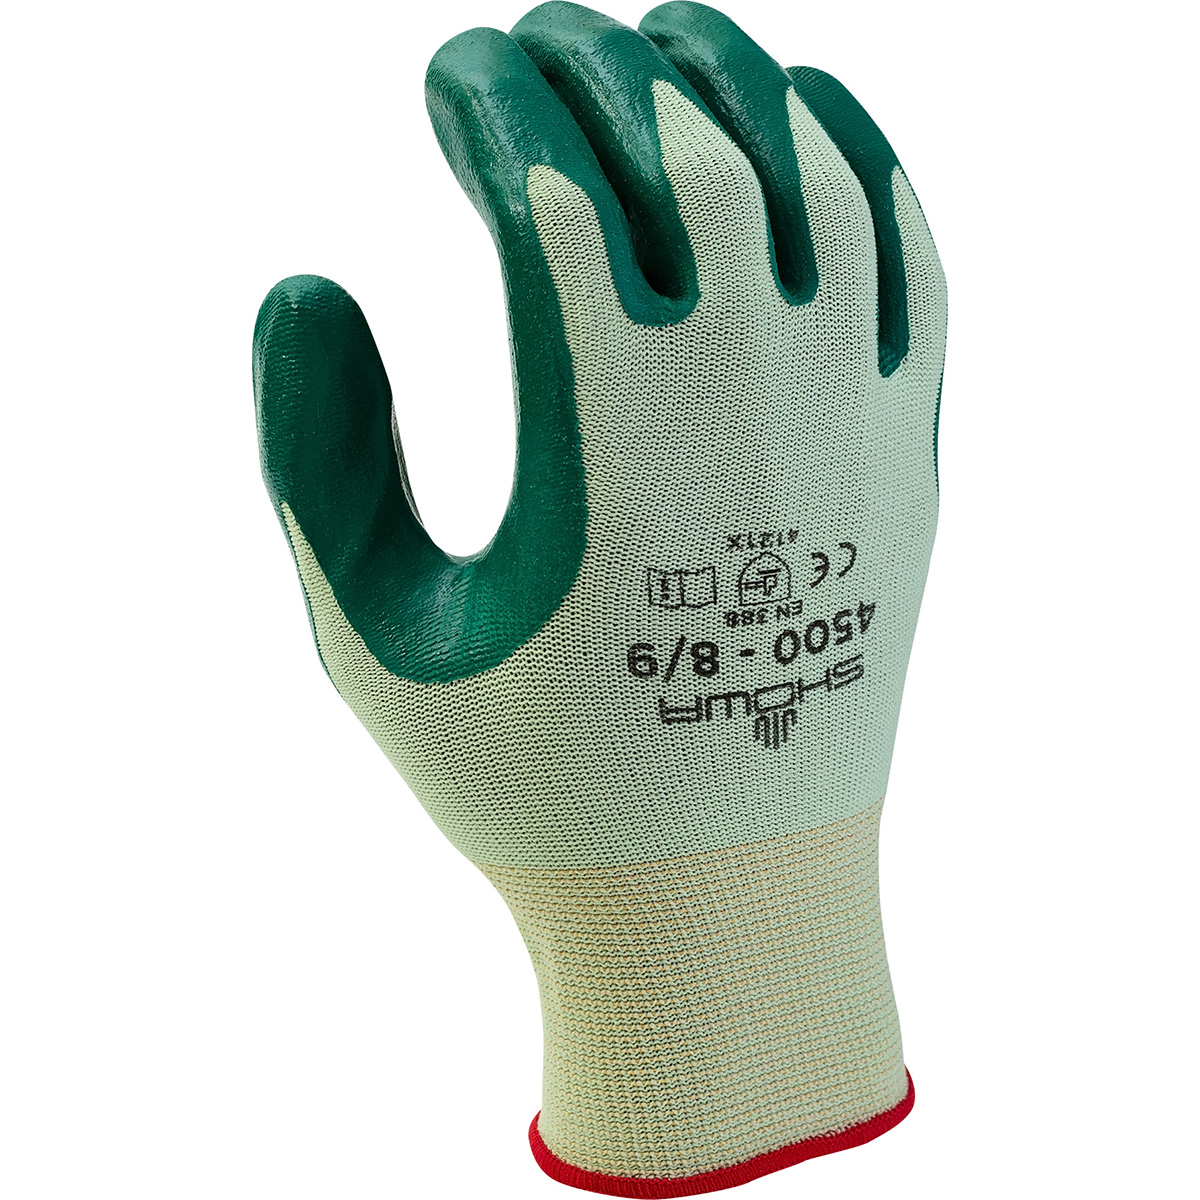 General purpose, nitrile-coated palm-dipped, light green w/green dip, nylon seamless shell, extra large